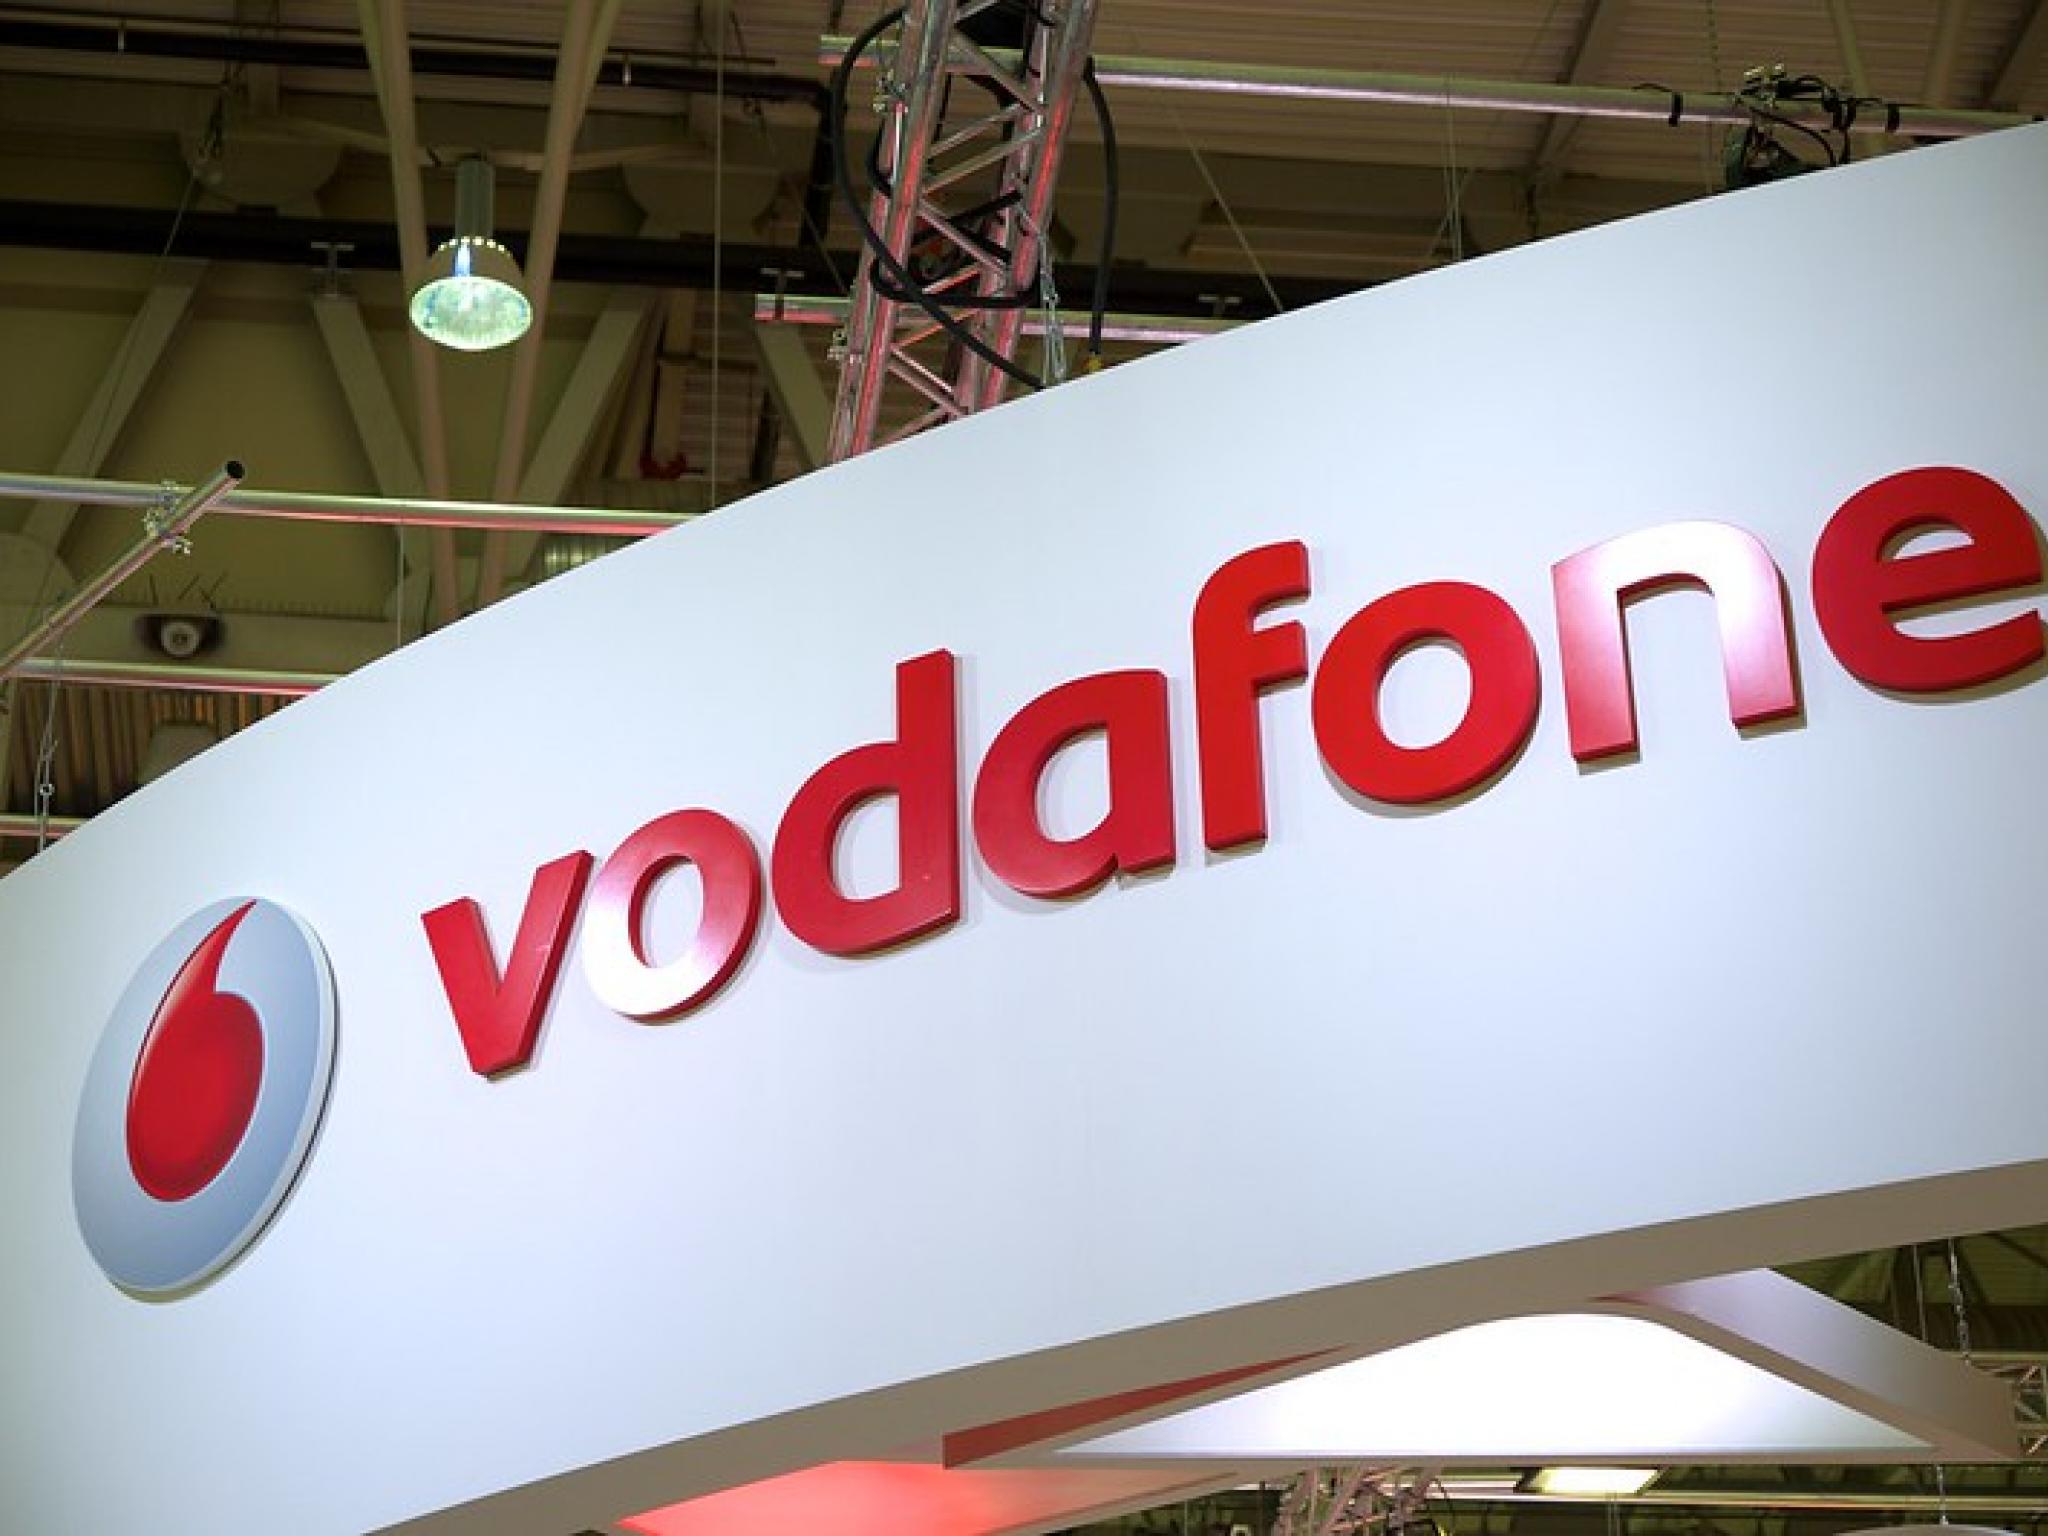  private-equity-firms-are-flocking-to-vodafones-tower-unit-valued-in-the-billions 